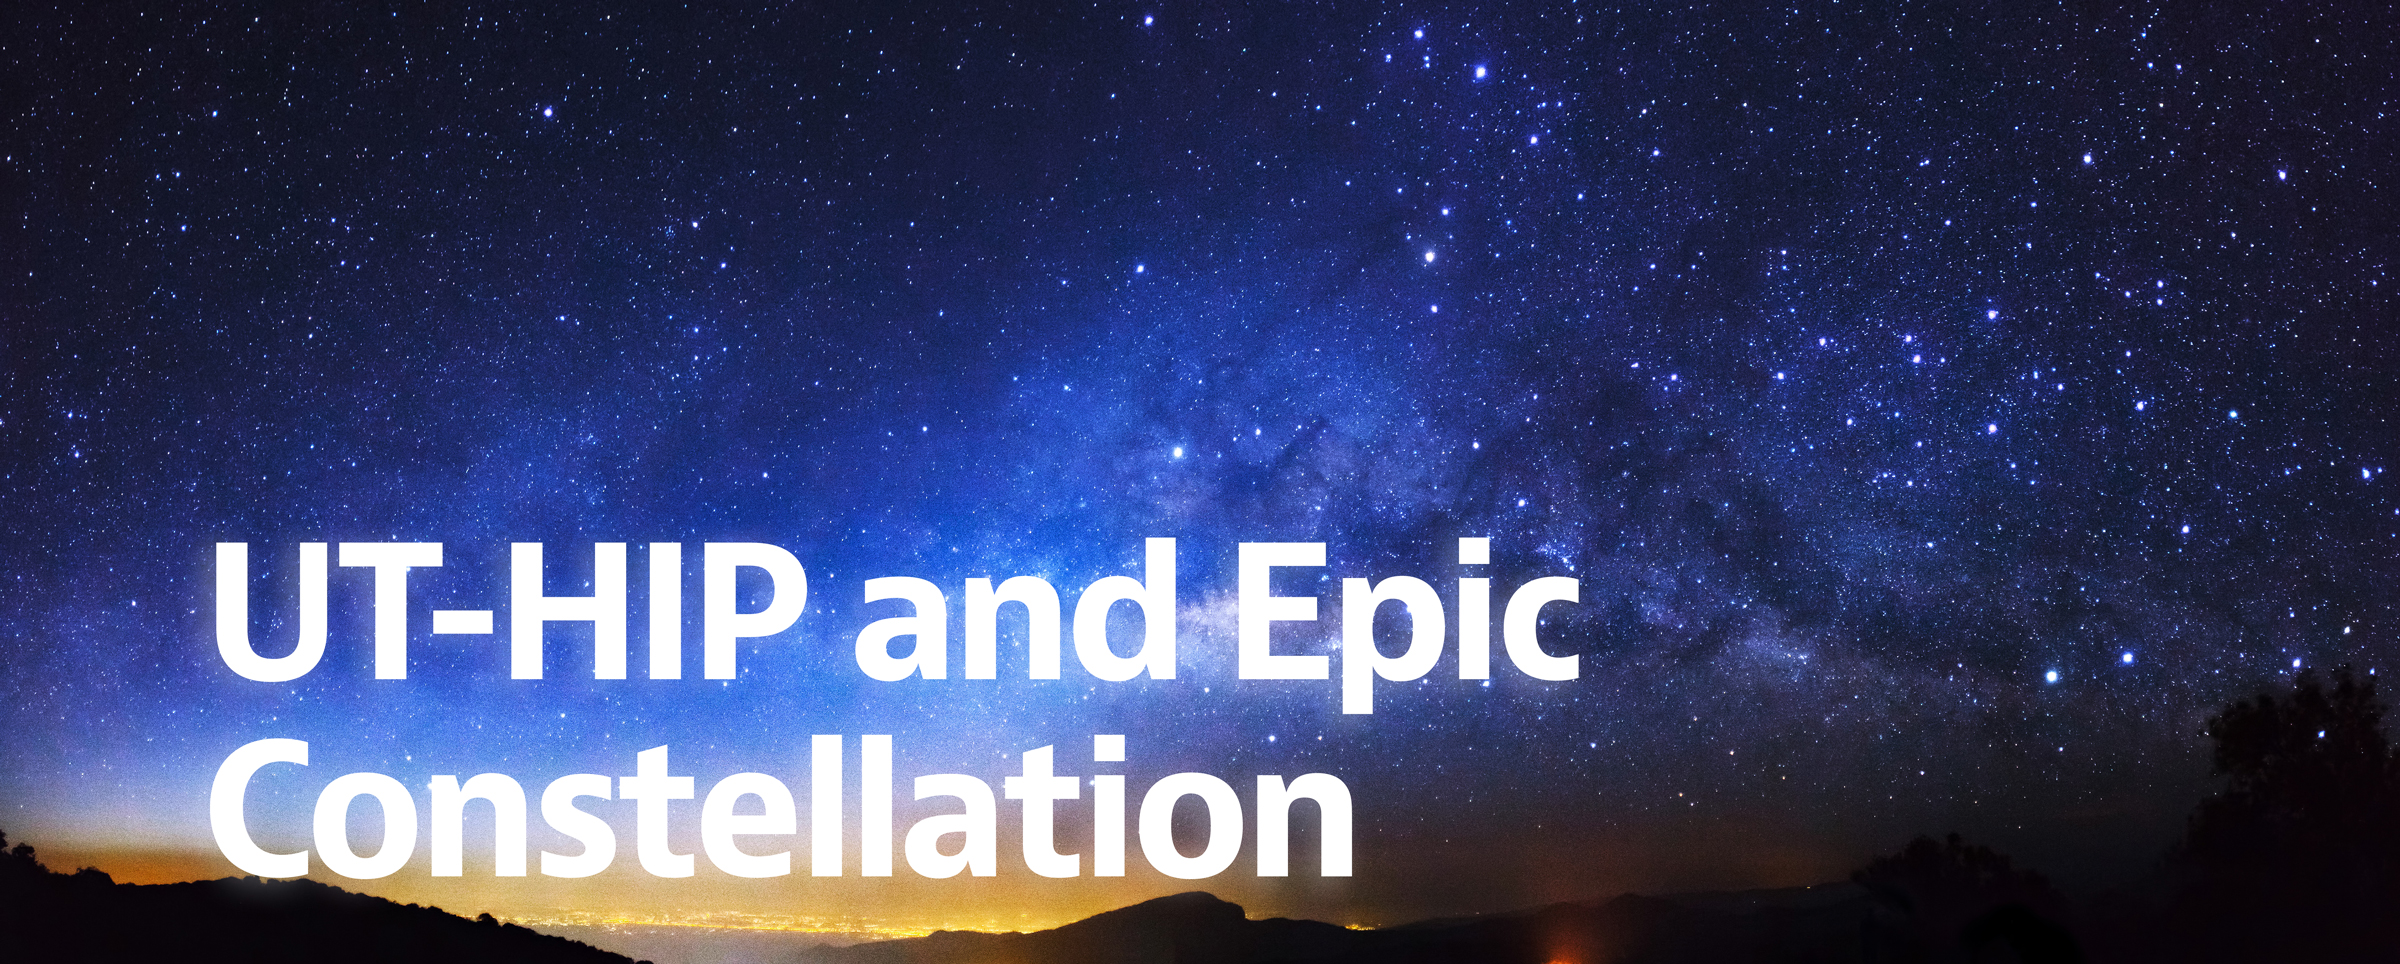 uthip and epic constellation